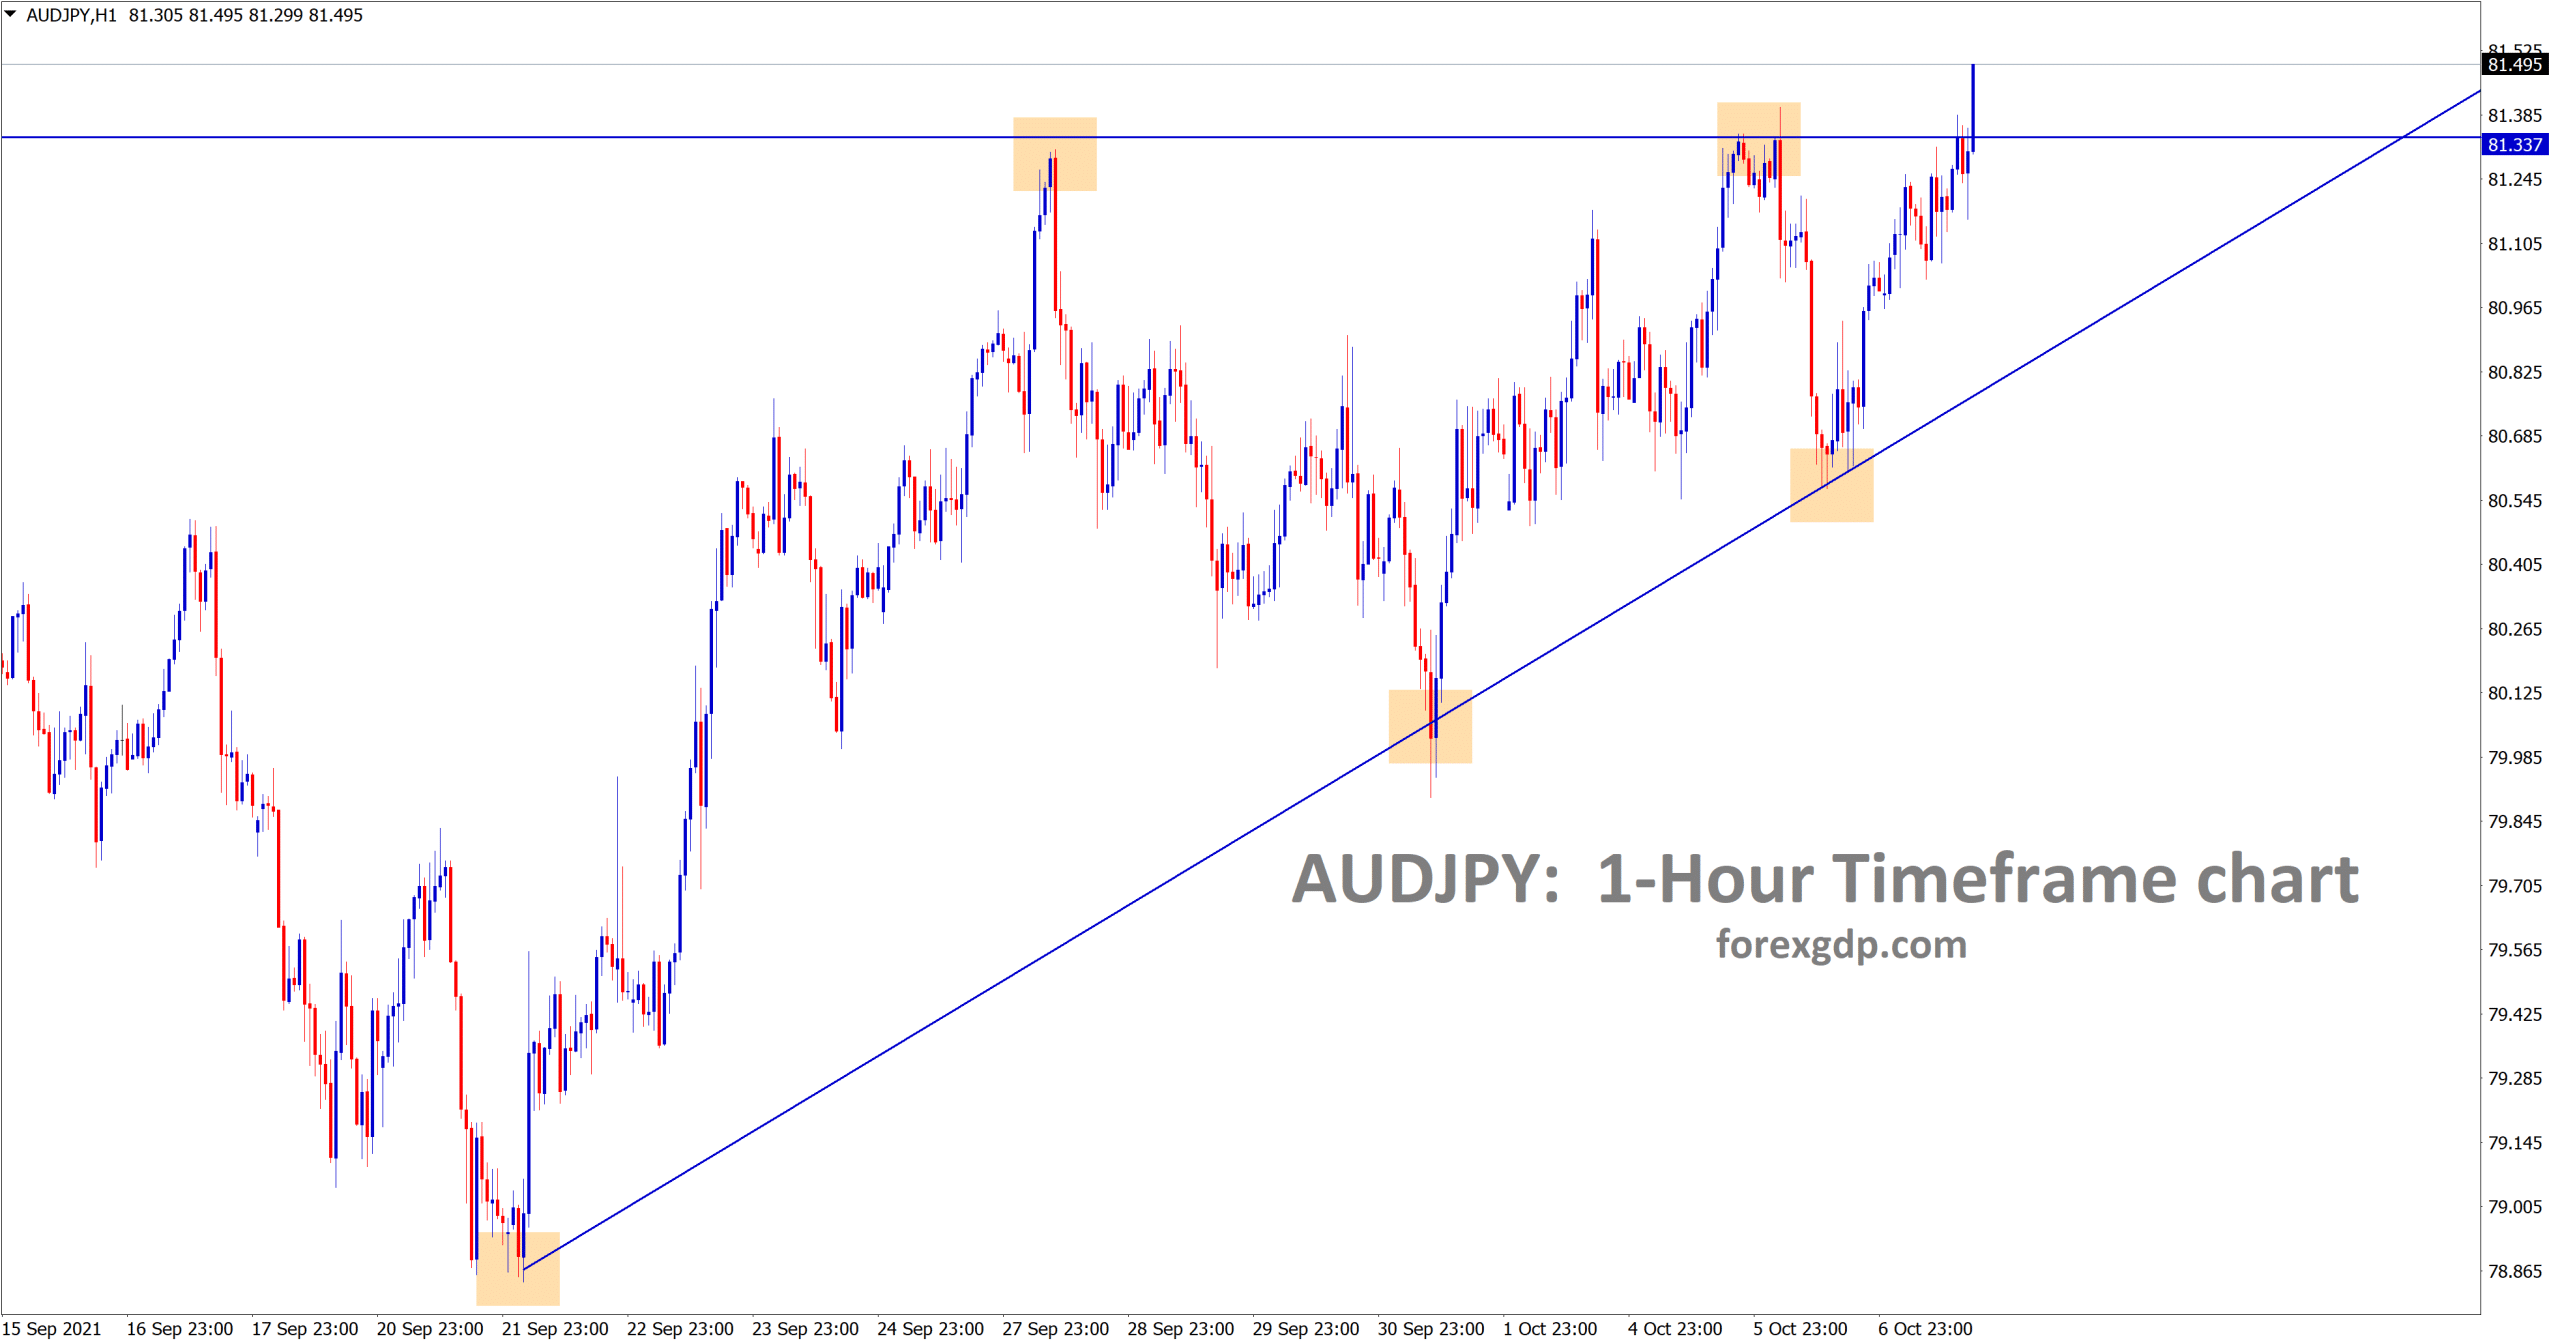 AUDJPY is breaking the top of the ascending triangle pattern